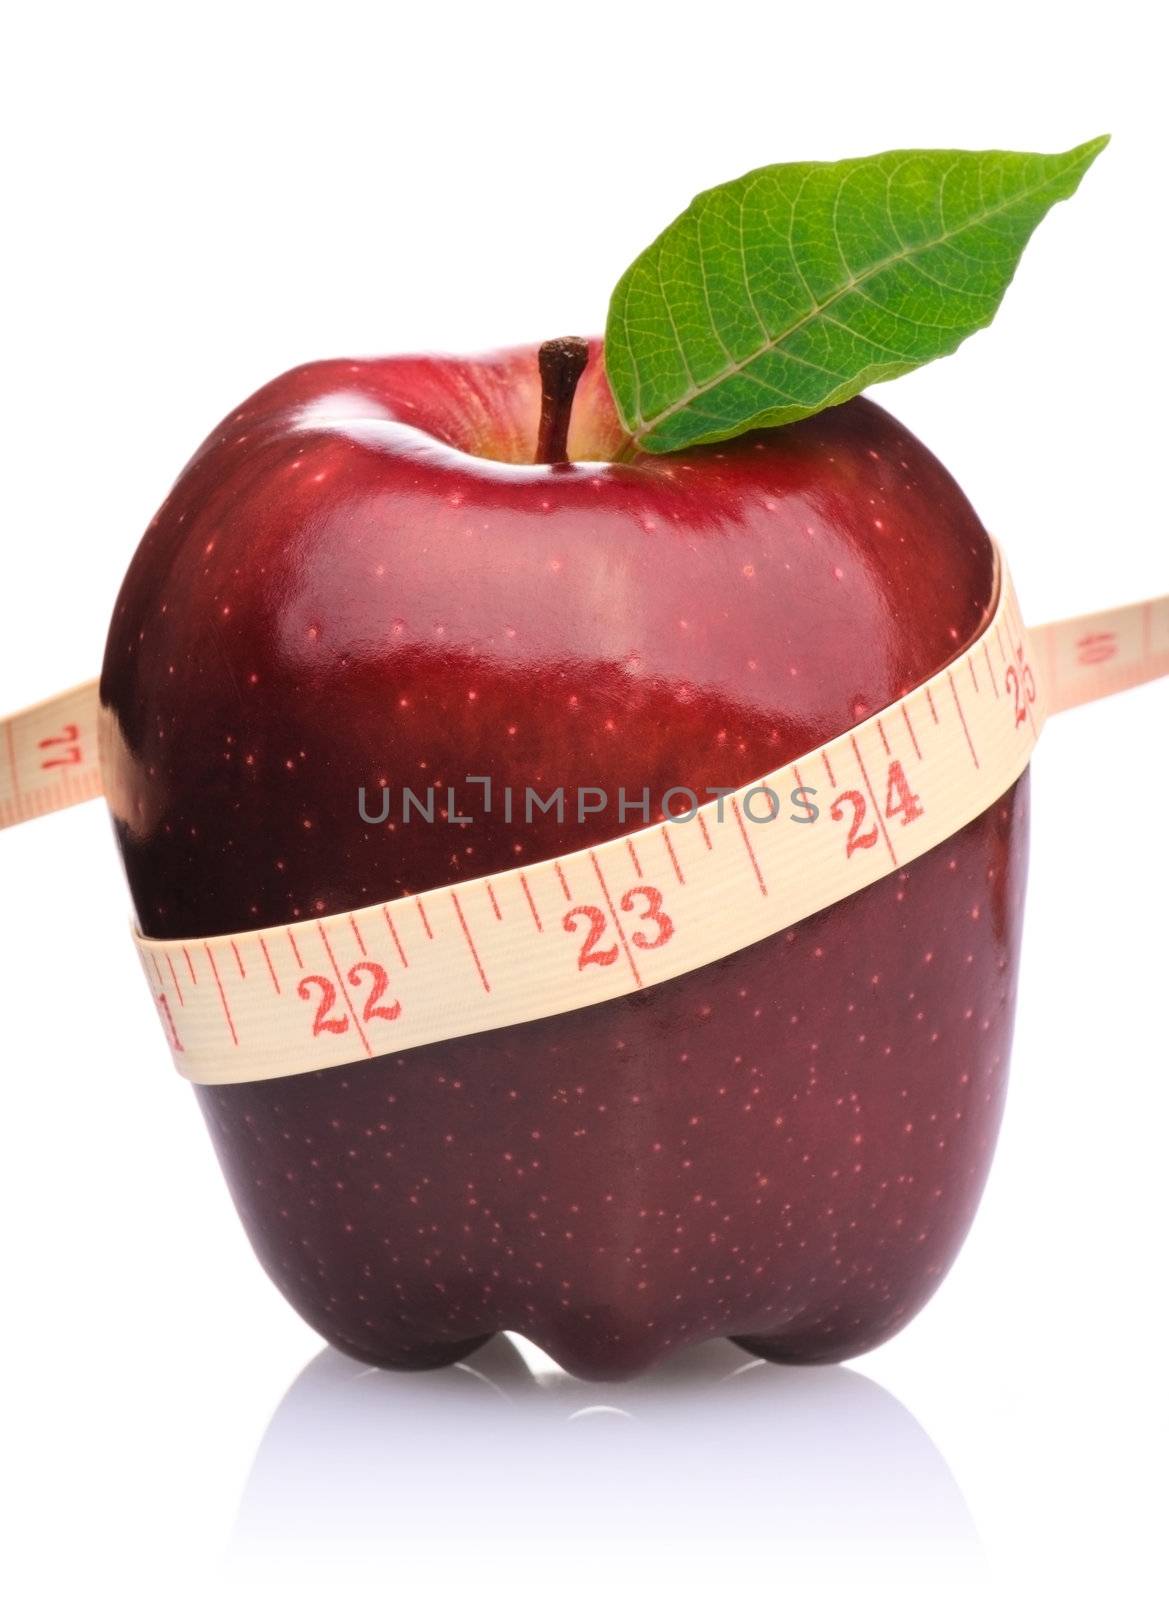 Measurement tape wrapped around red apple